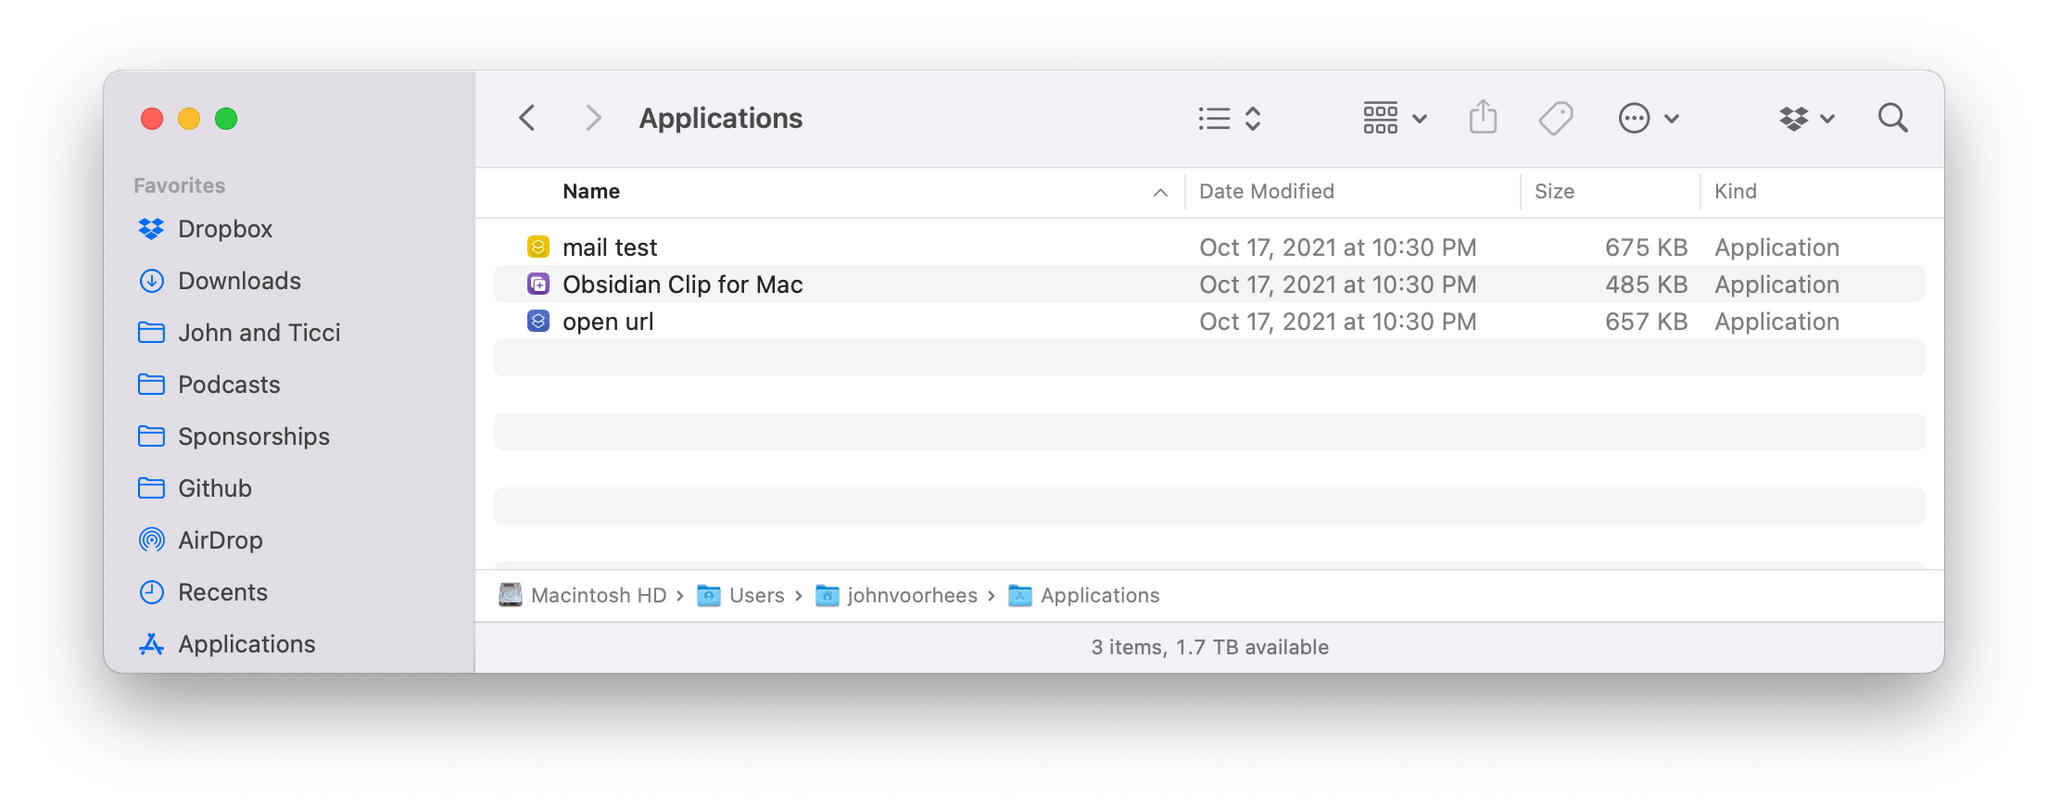 Dock applets are saved in a different Applications folder than the one you're probably used to using.